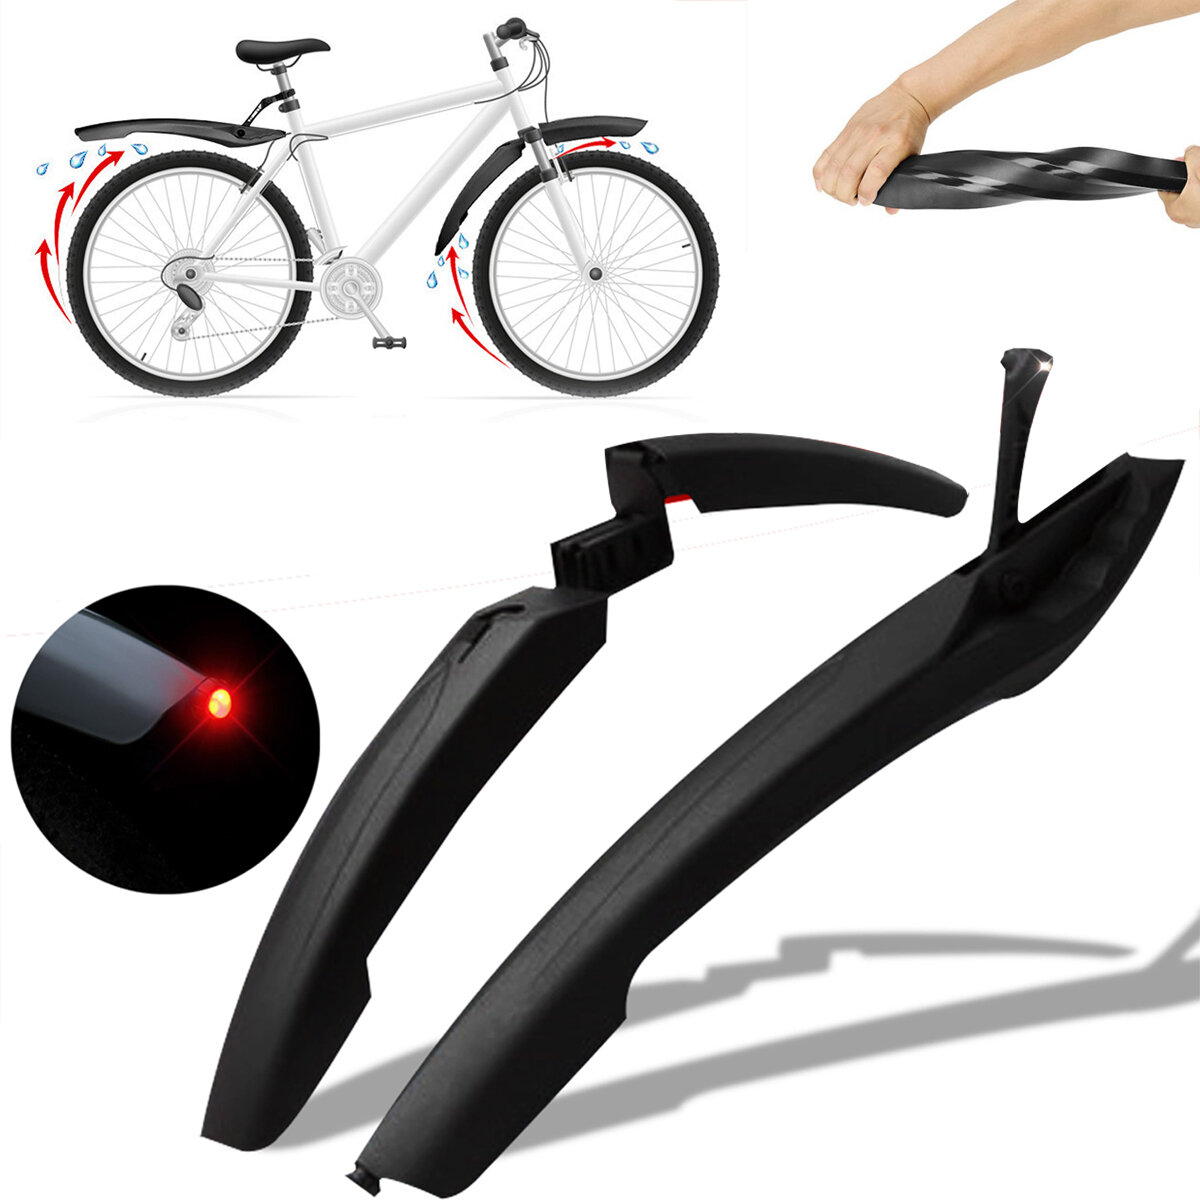 2 Pcs Bike Fender Front Rear Bicycle Mud Guard Cycling Tire Mudguard with Lights Mountain Bike Mudguards